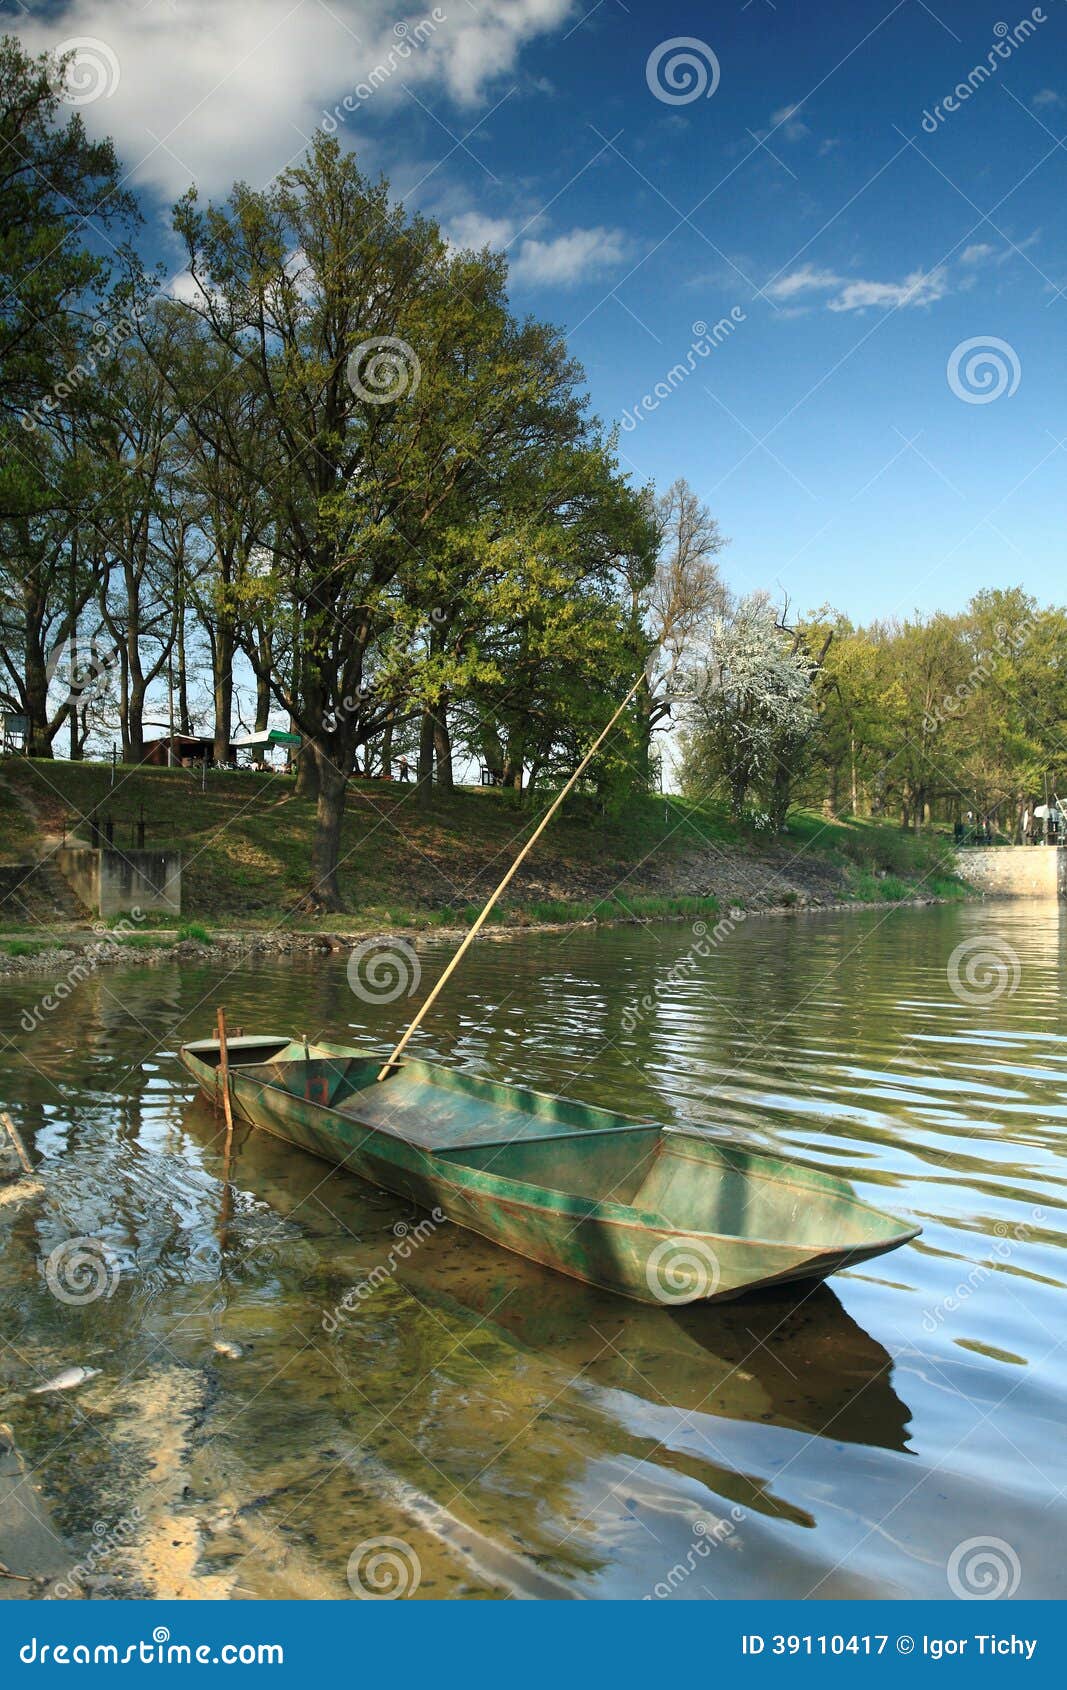 Fishing Boat on the Pond Rozmberk Stock Image - Image of republic, dinghy:  39110417